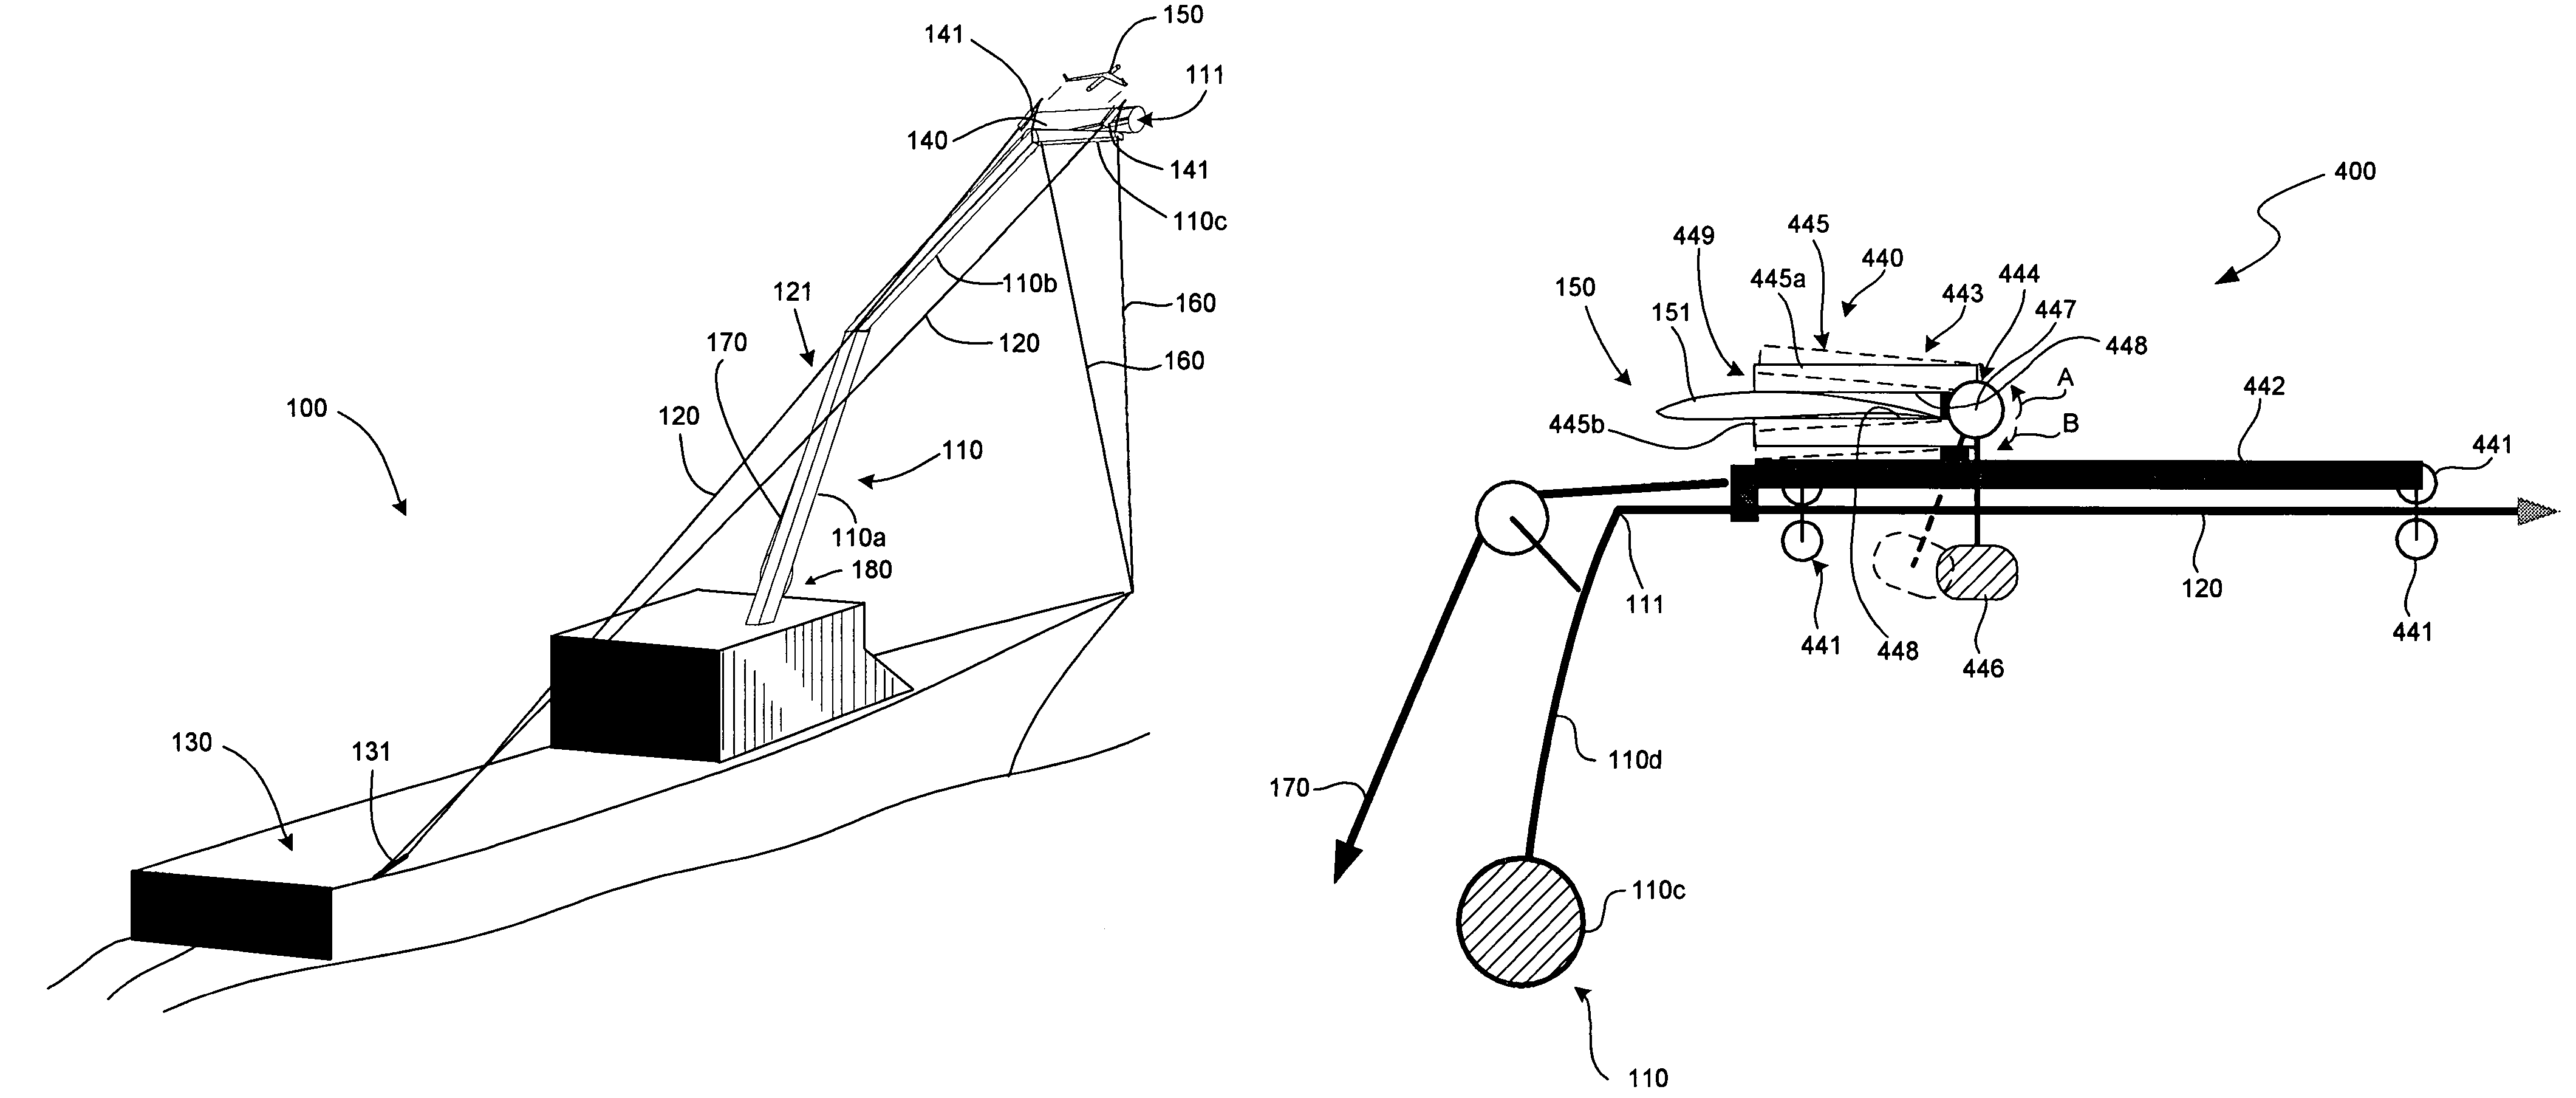 Methods and apparatuses for launching airborne devices along flexible elongated members